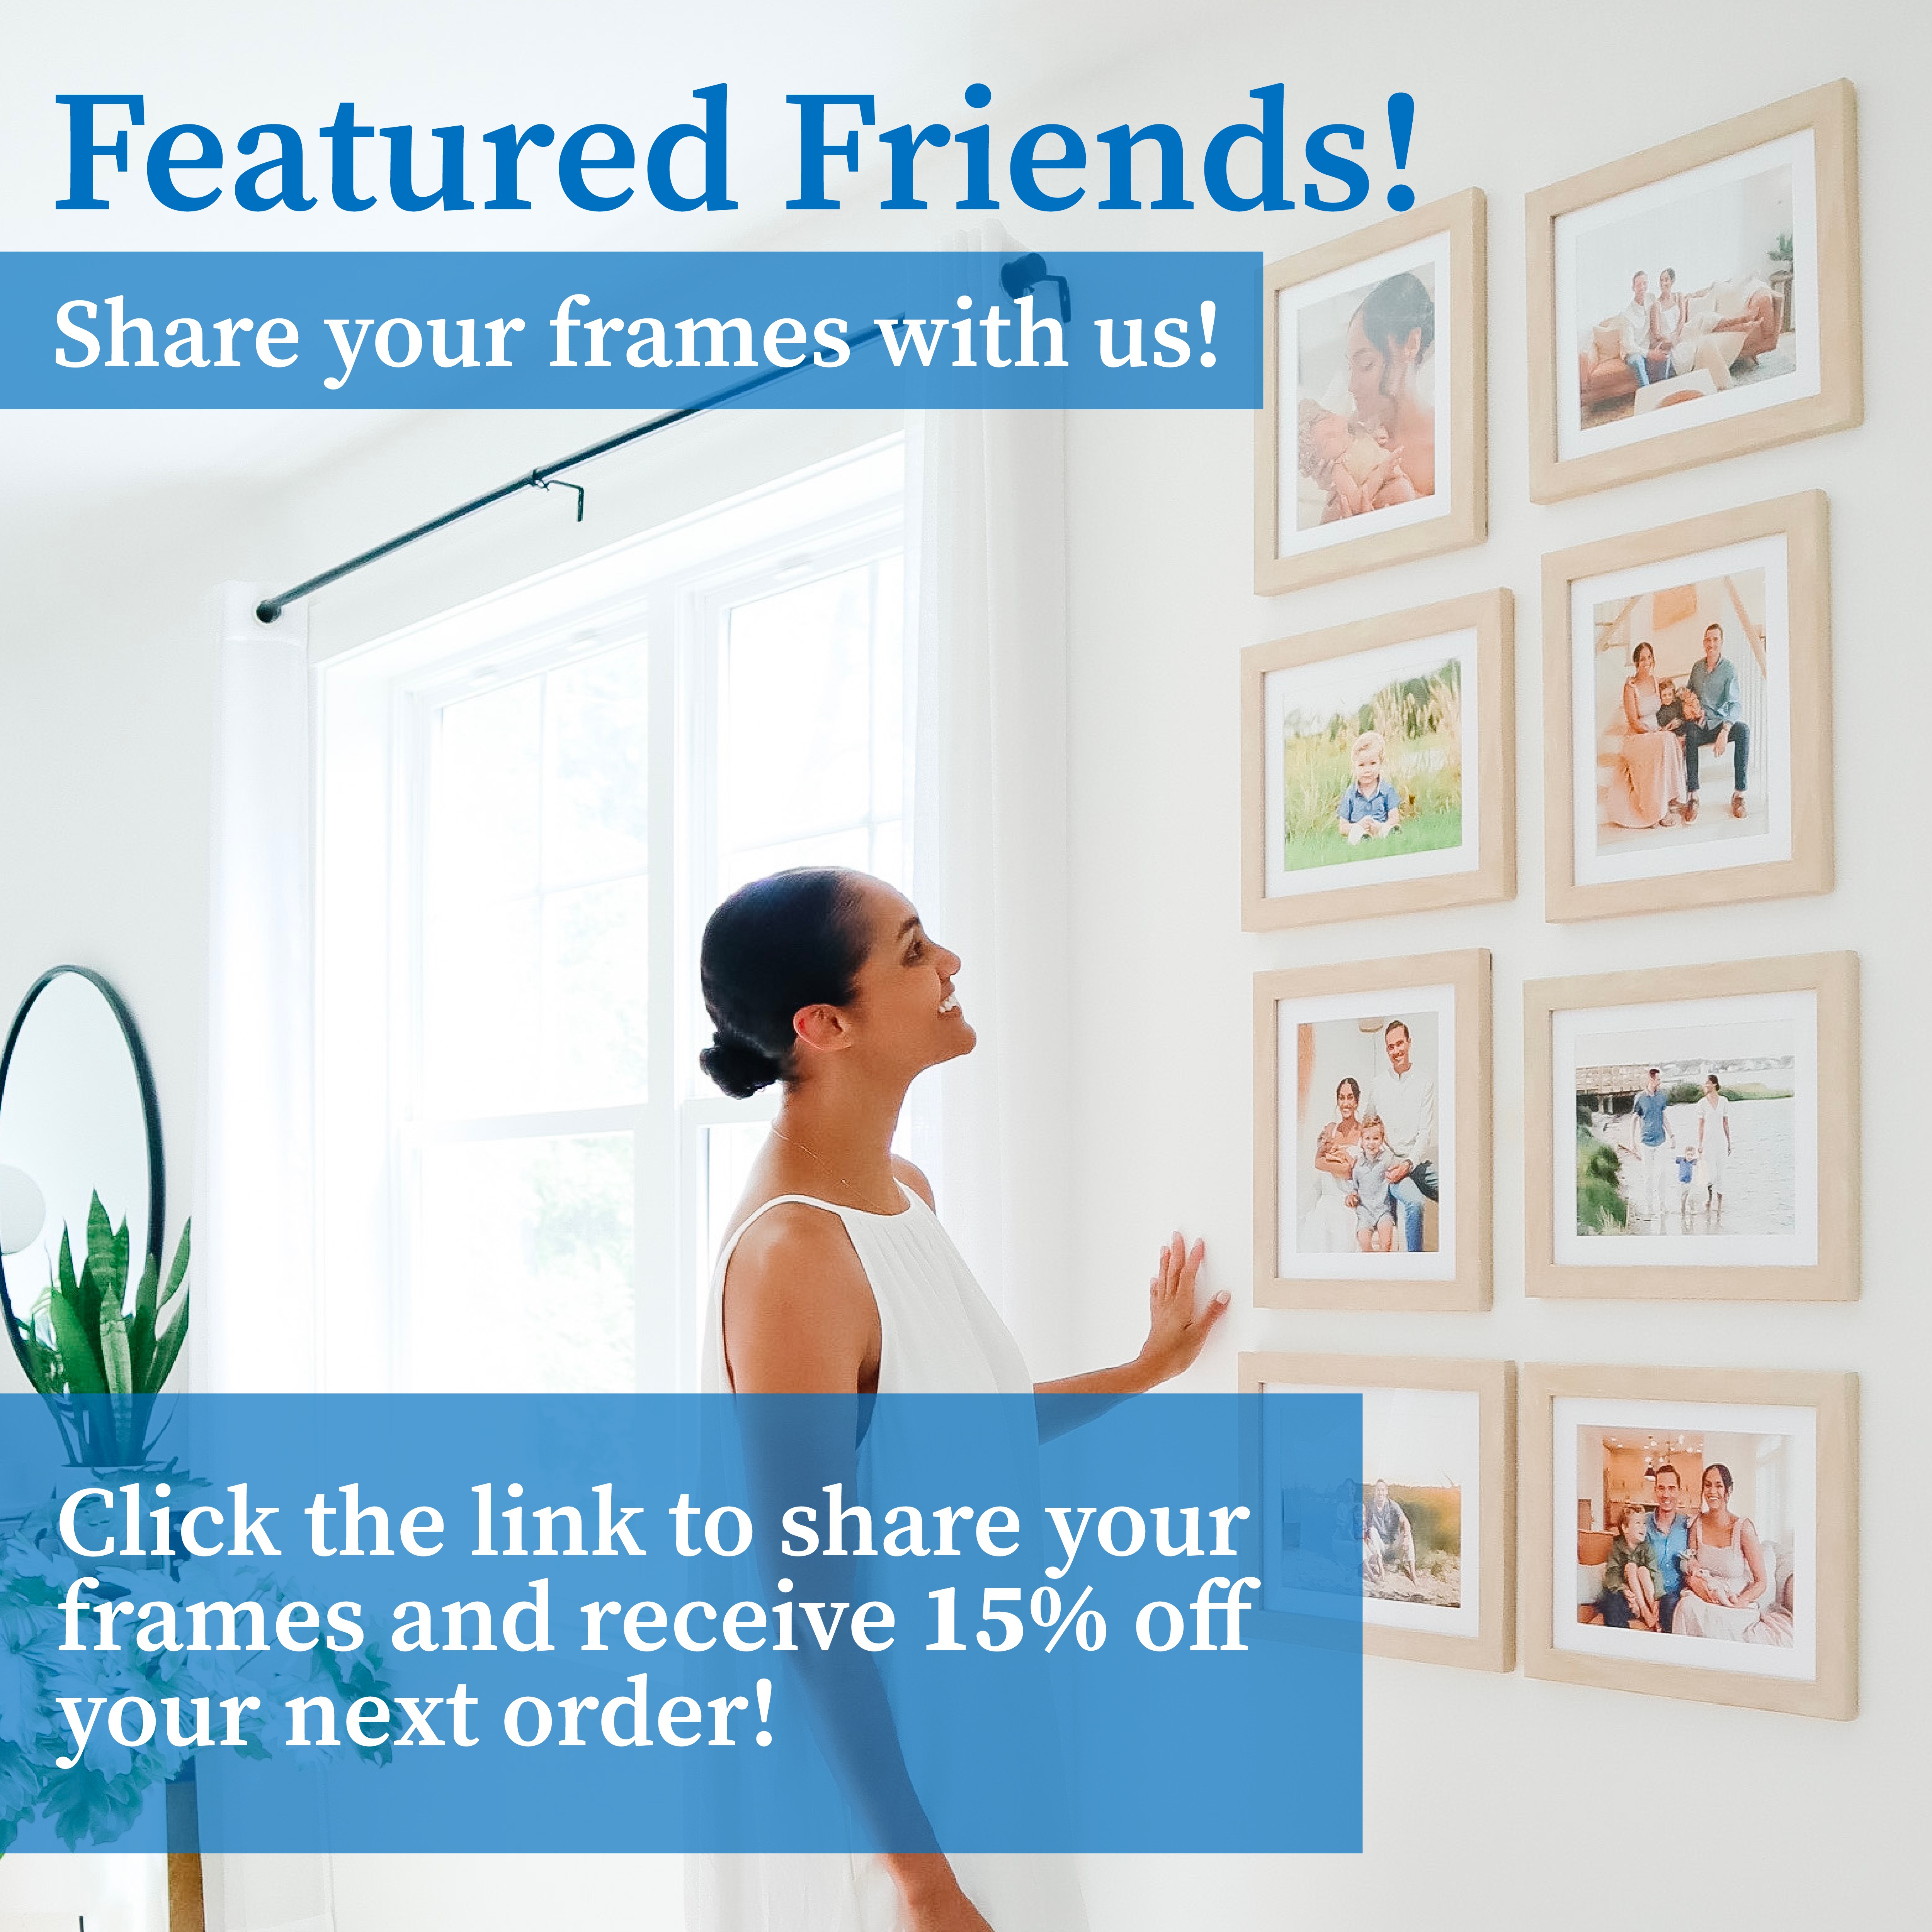 Creating A Frame It Easy Customer Account: Featured Friends - Share your frames and receive 15% off your next order!